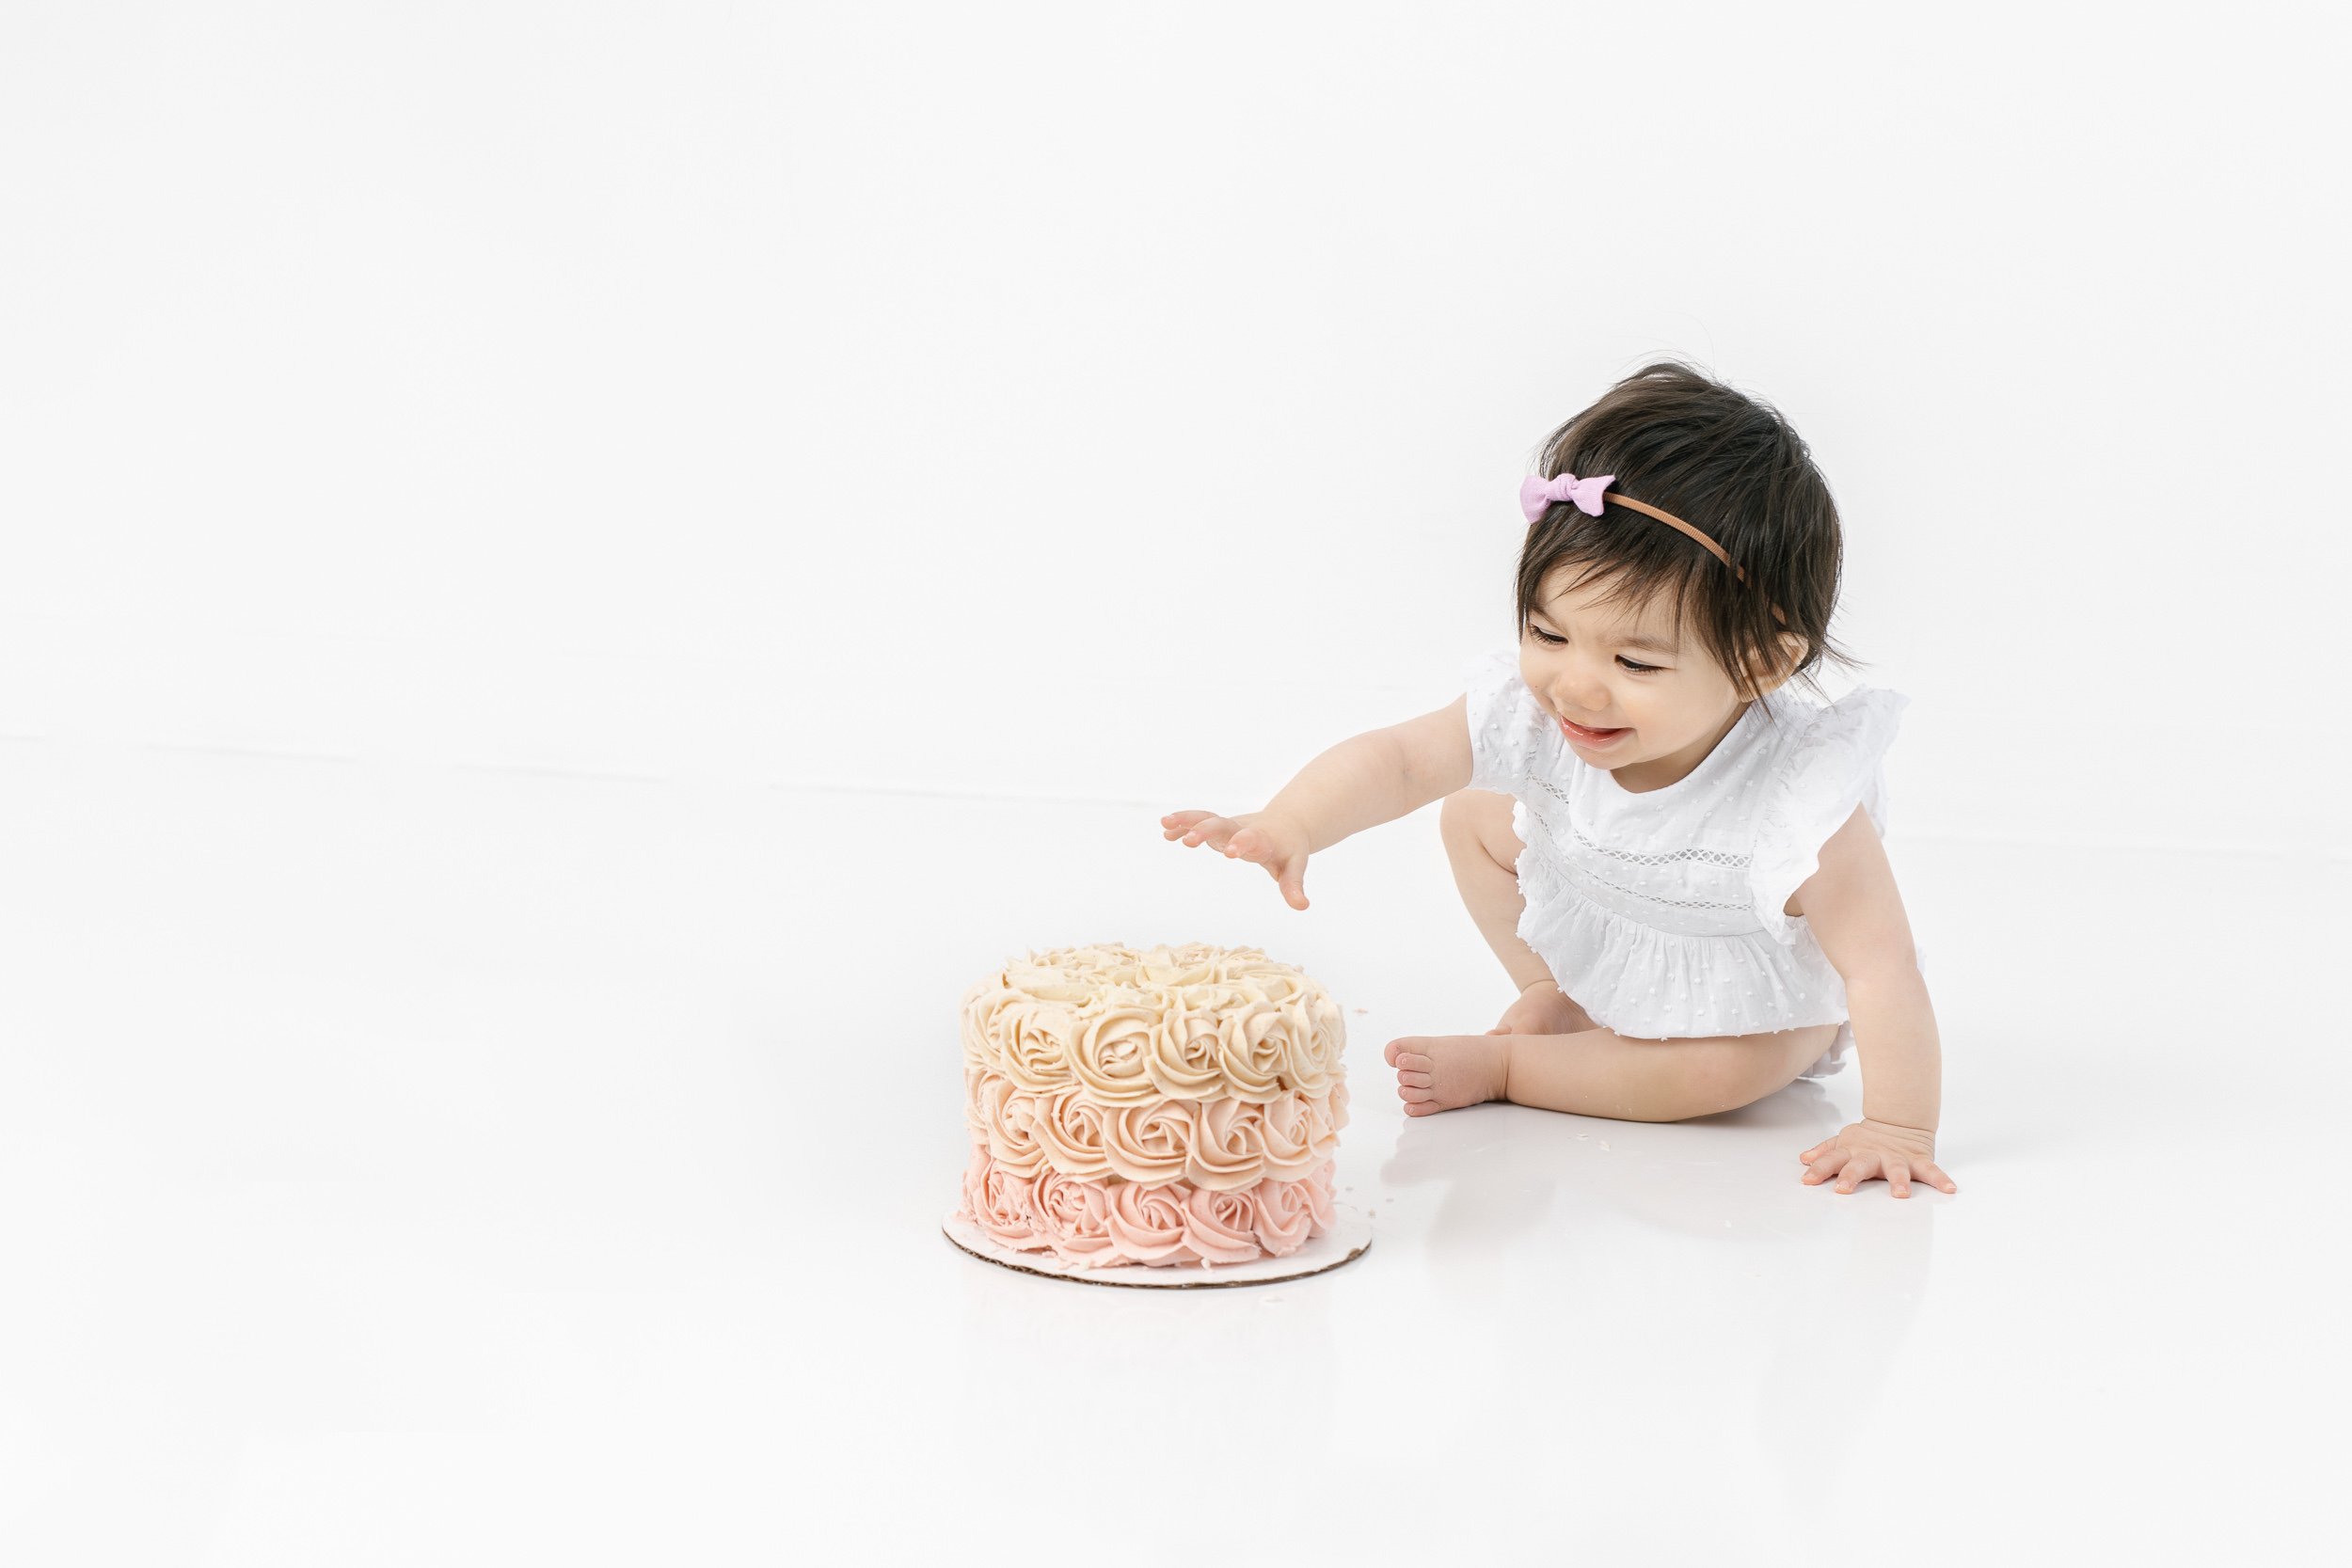  A little girl reaches for her pink ombre smash cake during a studio session with Nicole Hawkins Photography. pink ombre smash cake portraits #nicolehawkinsphotography #nicolehawkinsbirthday #nicolehawkinsportraits #NJstudiophotography #1stbirthday 